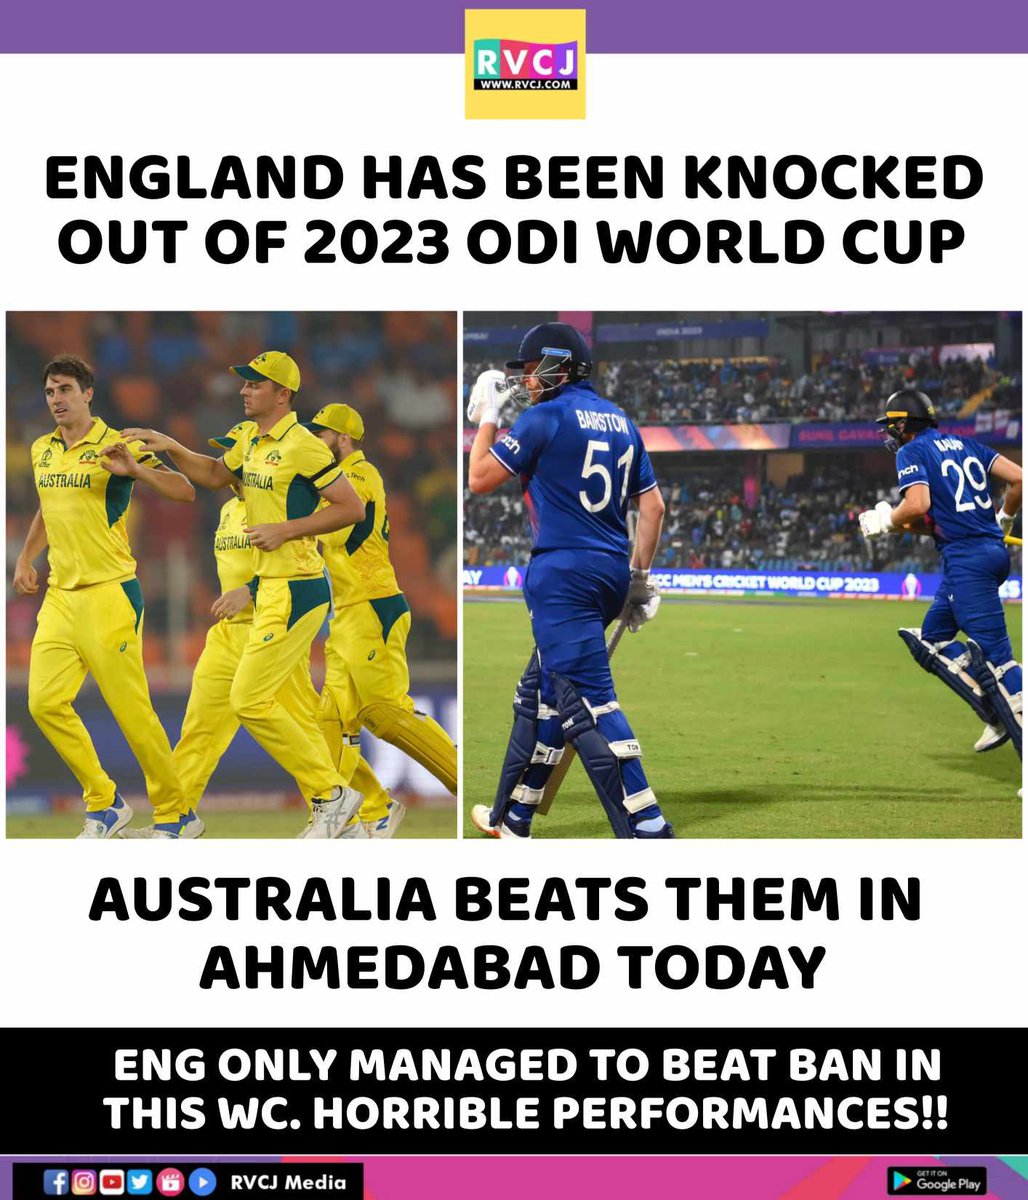 Despite England being a “man for man” better side than Australia (per Joe Root), they once again failed to score more runs than their opponent (meaning they lost) 

England now officially cannot make the semis.

📷 @RVCJ_FB

#AUSvENG #ODIWorldCup2023 #ICCWorldCup2023 #AUSvsENG